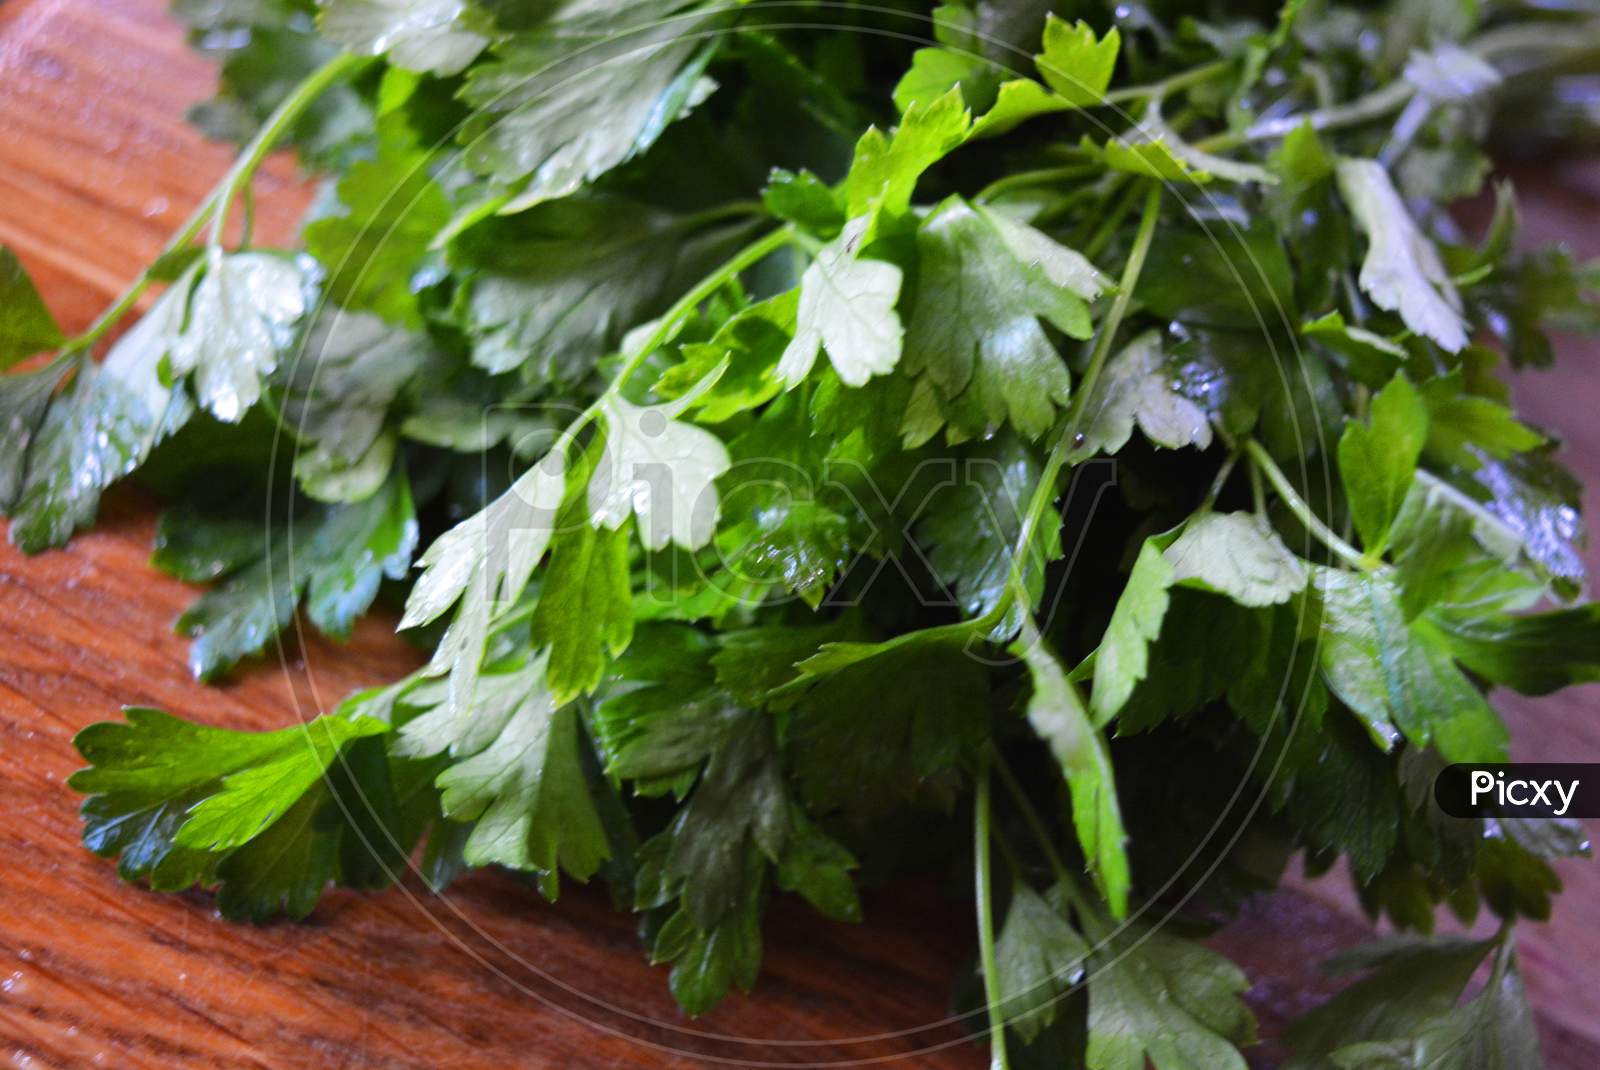 Bunches of green washed fresh parsley laid out on a wooden kitchen board.